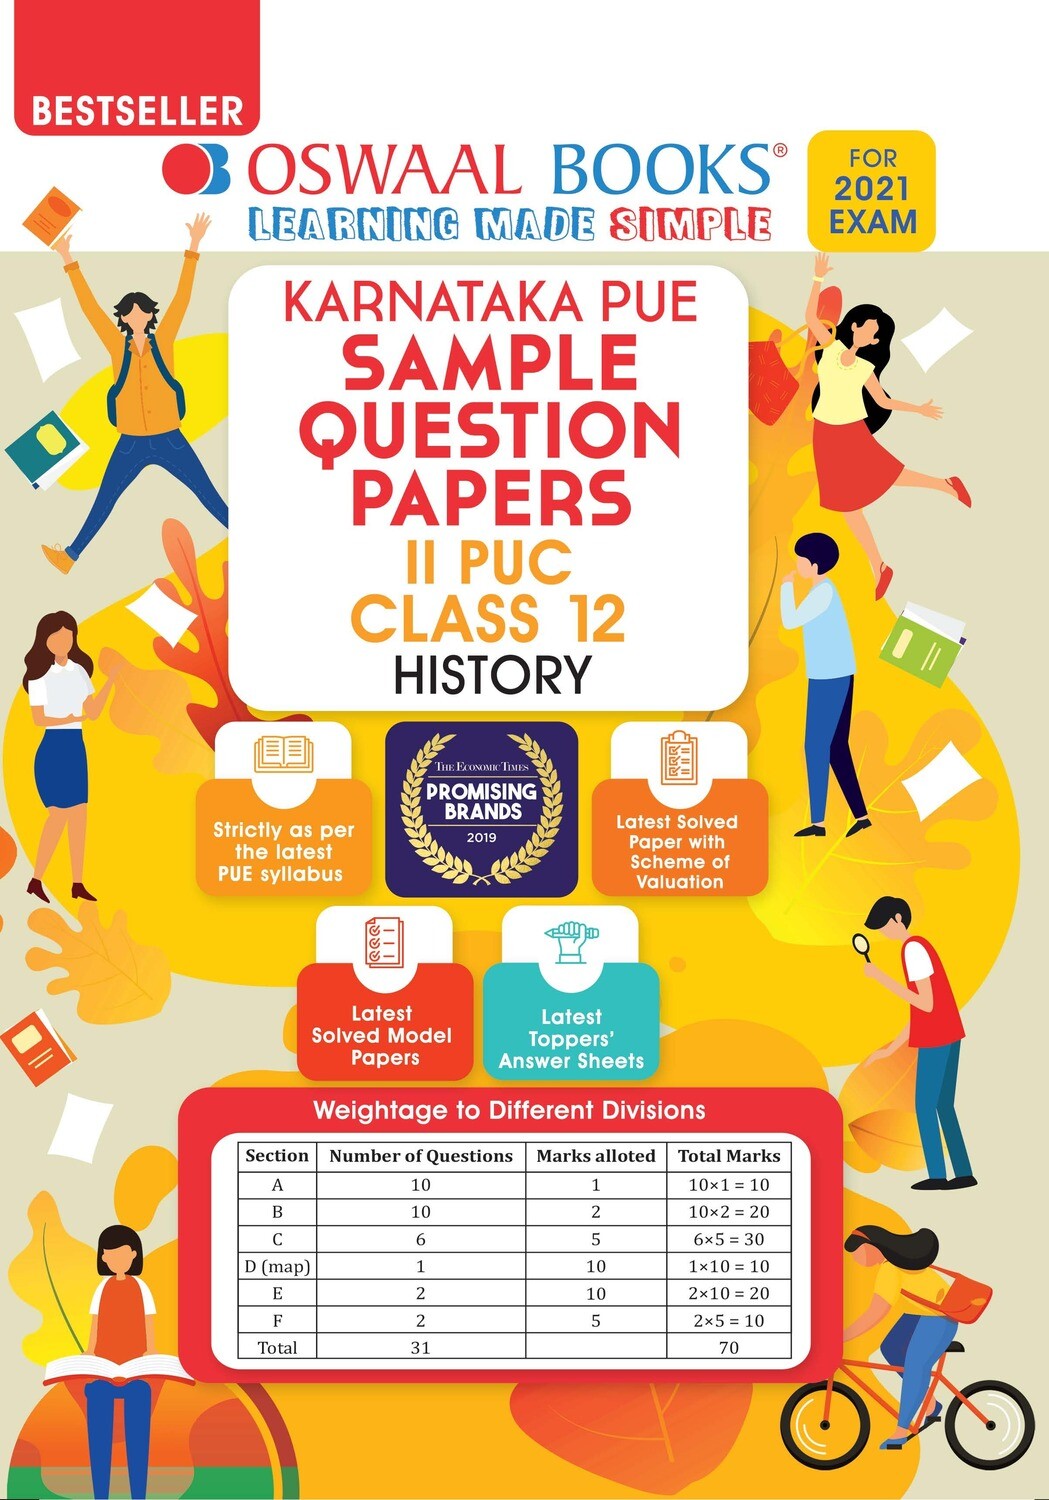 Buy e-book: Oswaal Karnataka PUE Sample Question Papers II PUC Class 12 History (For 2021 Exam)